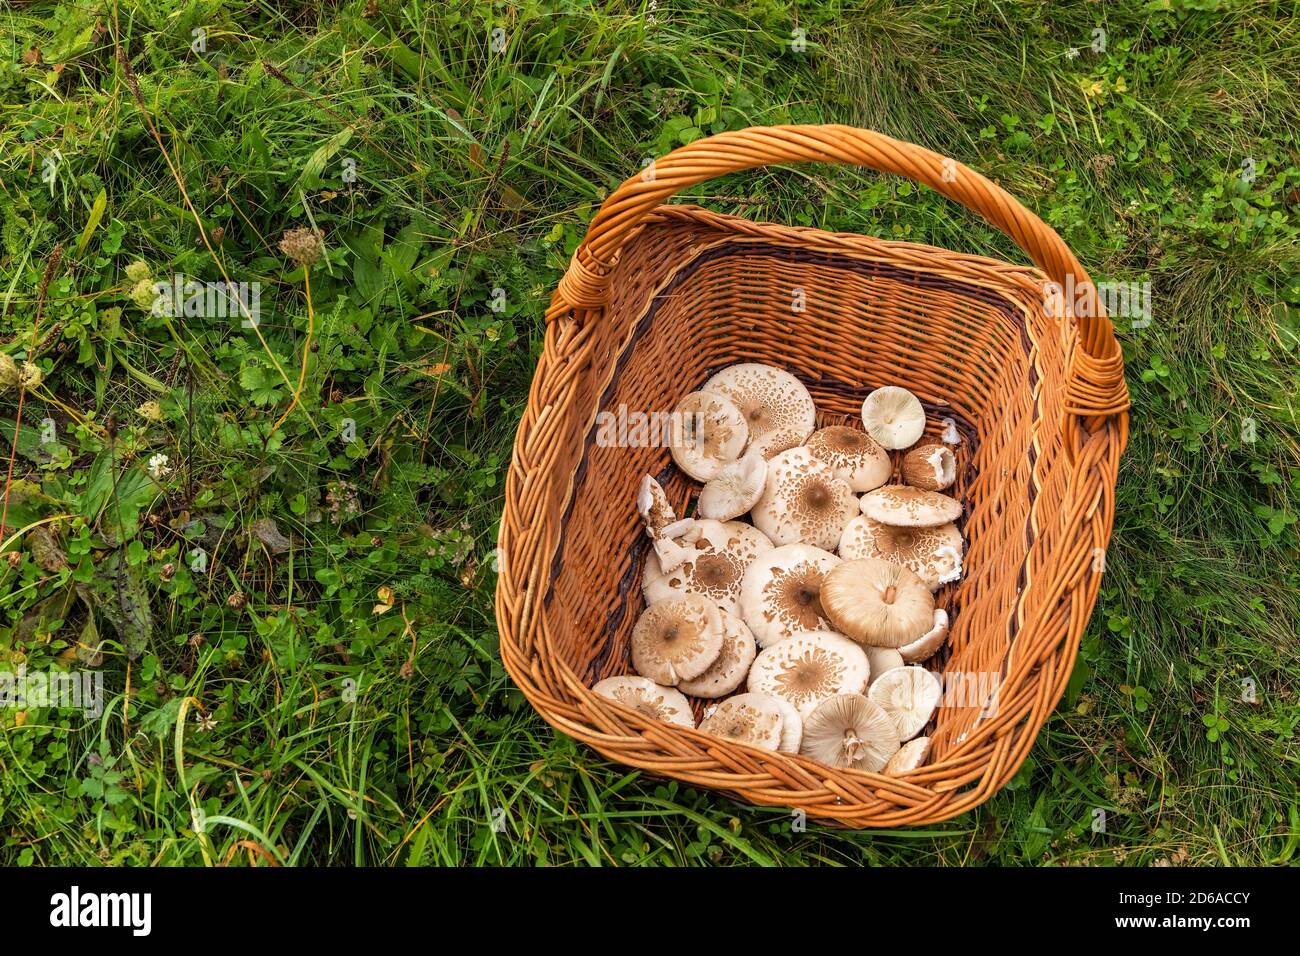 Mushrooms in a basket. Mushroom picking. Chlorophyllum rhacodes. Mushrooms in the grass in the meadow after the rain. Water drops on grass. Stock Photo